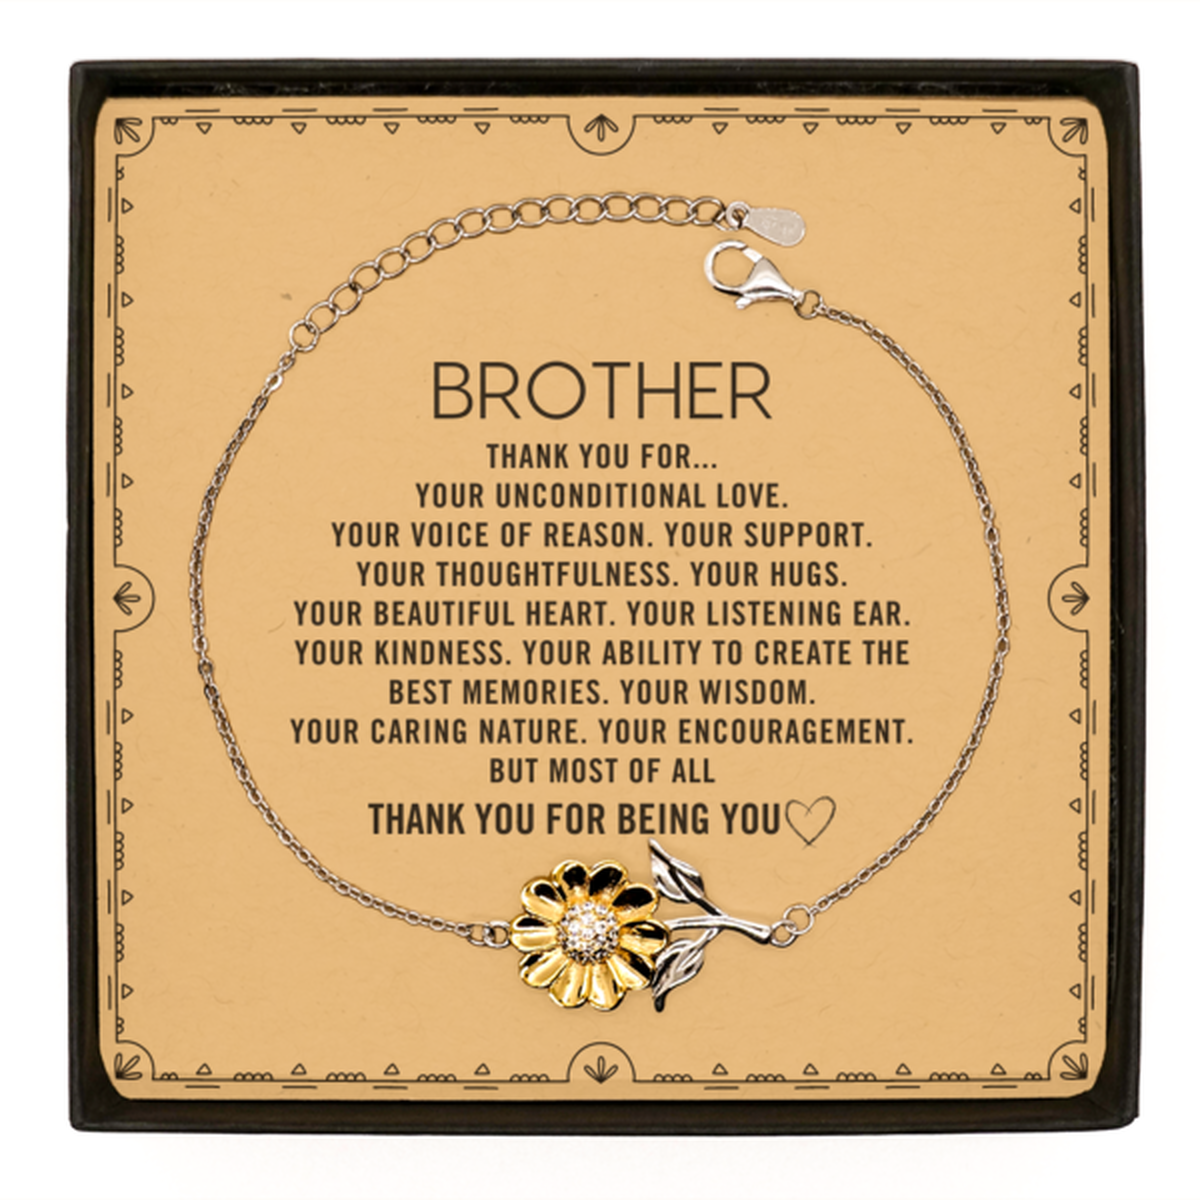 Brother Sunflower Bracelet Custom, Message Card Gifts For Brother Christmas Graduation Birthday Gifts for Men Women Brother Thank you for Your unconditional love